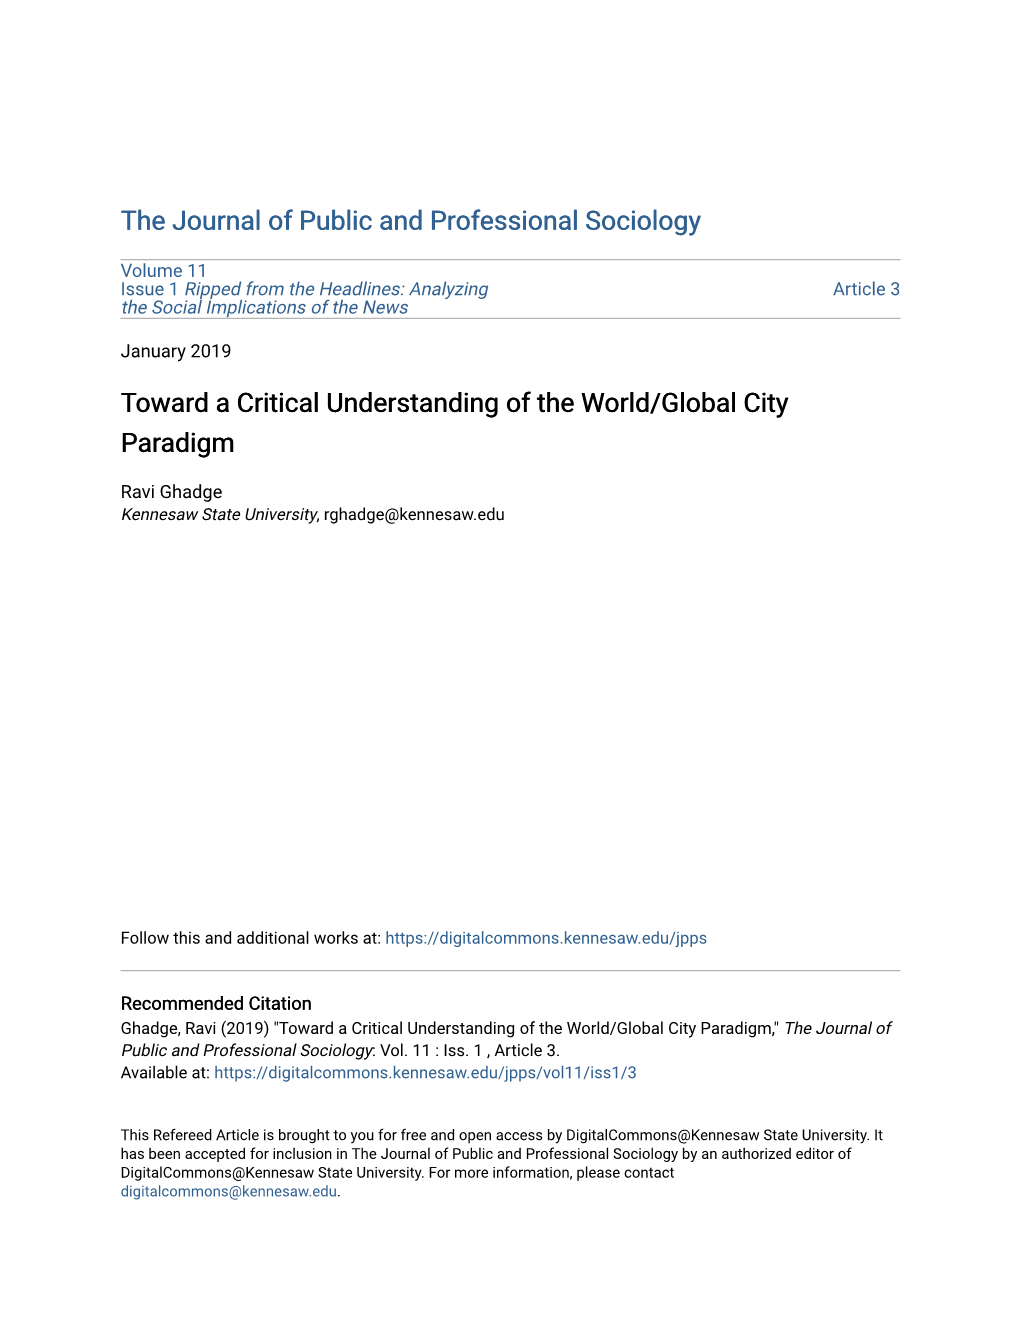 Toward a Critical Understanding of the World/Global City Paradigm